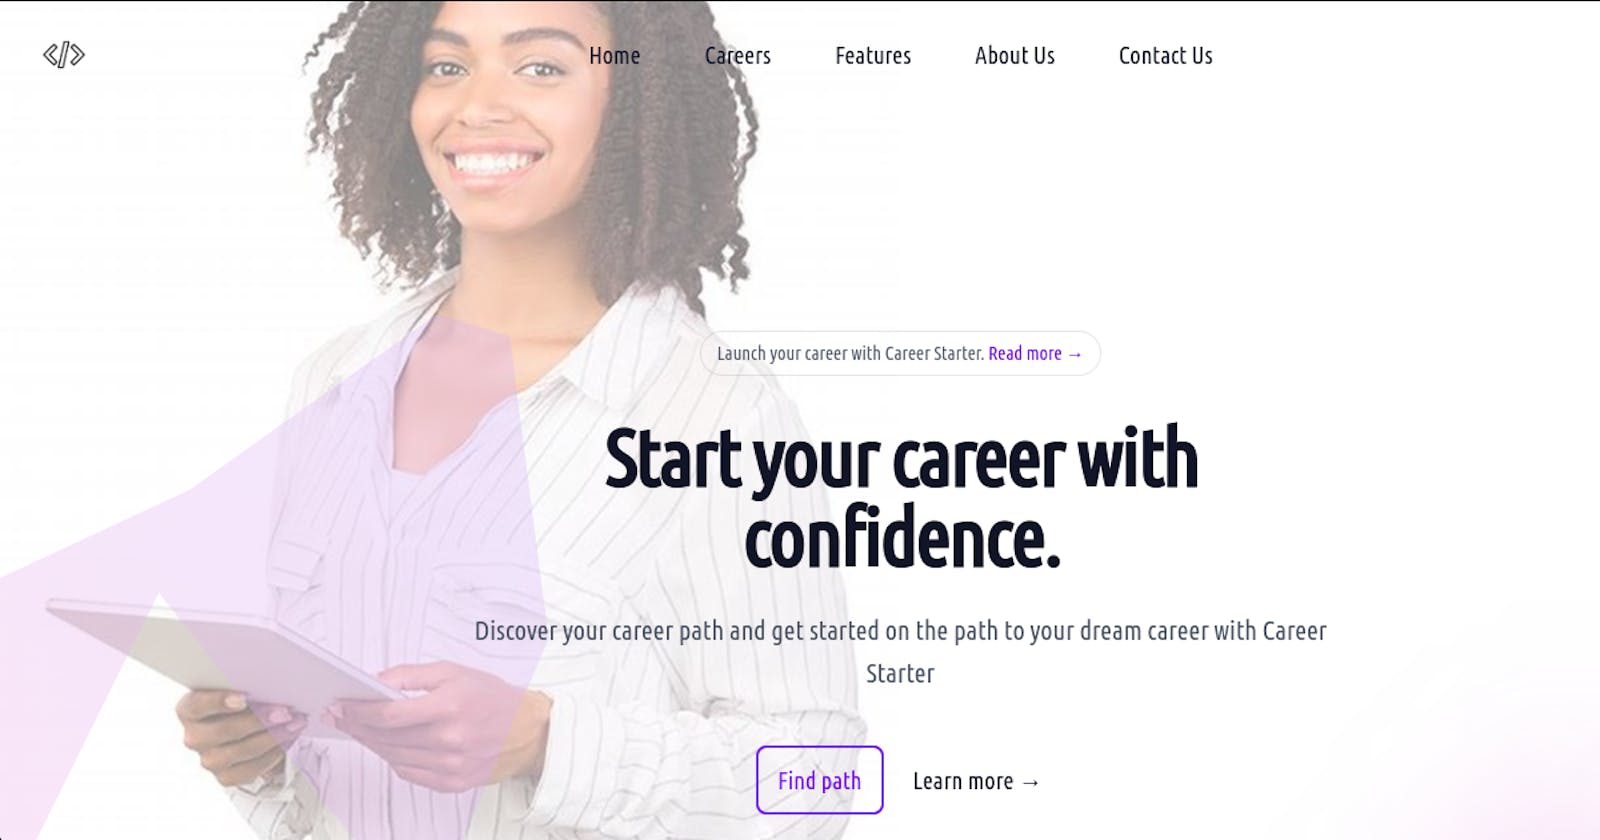 Building a Career Site: Empowering Individuals to Navigate Their Professional Paths